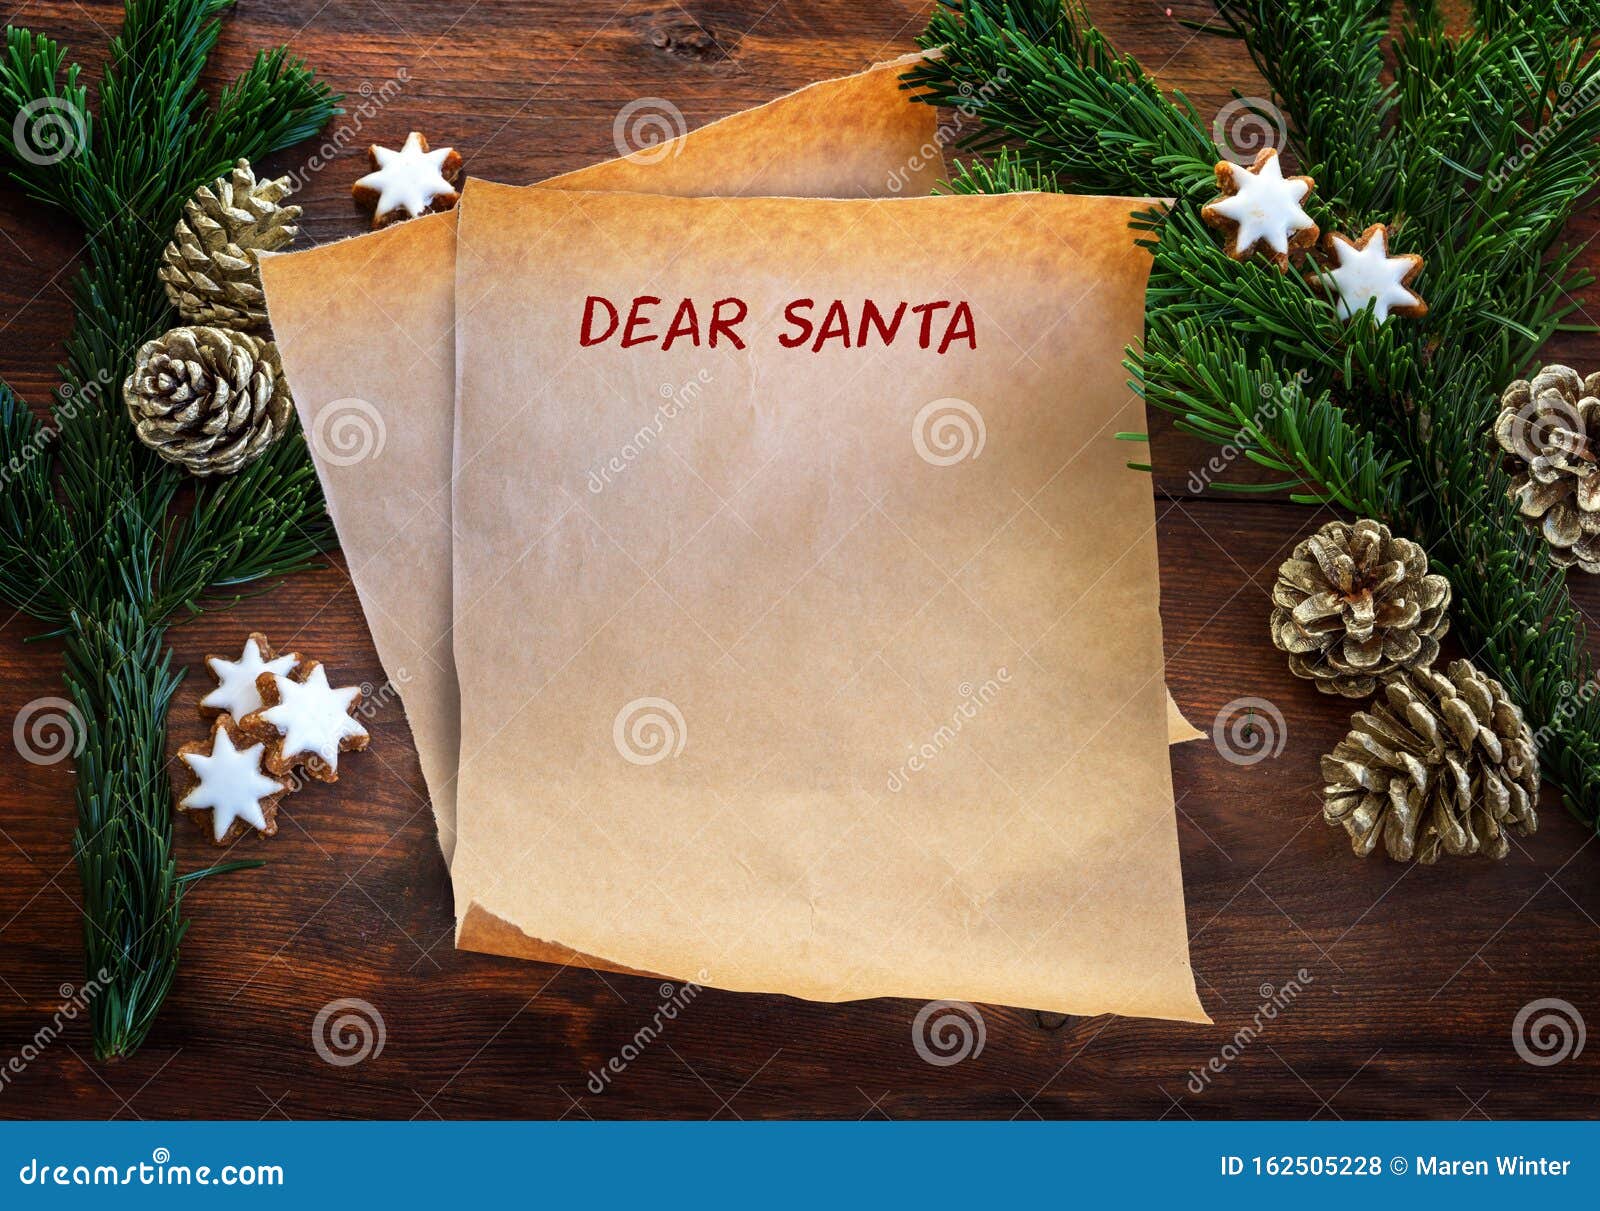 paper sheet with text dear santa, between fir branches, cinnamon stars and pine cones on rustic dark wood, christmas wish list or